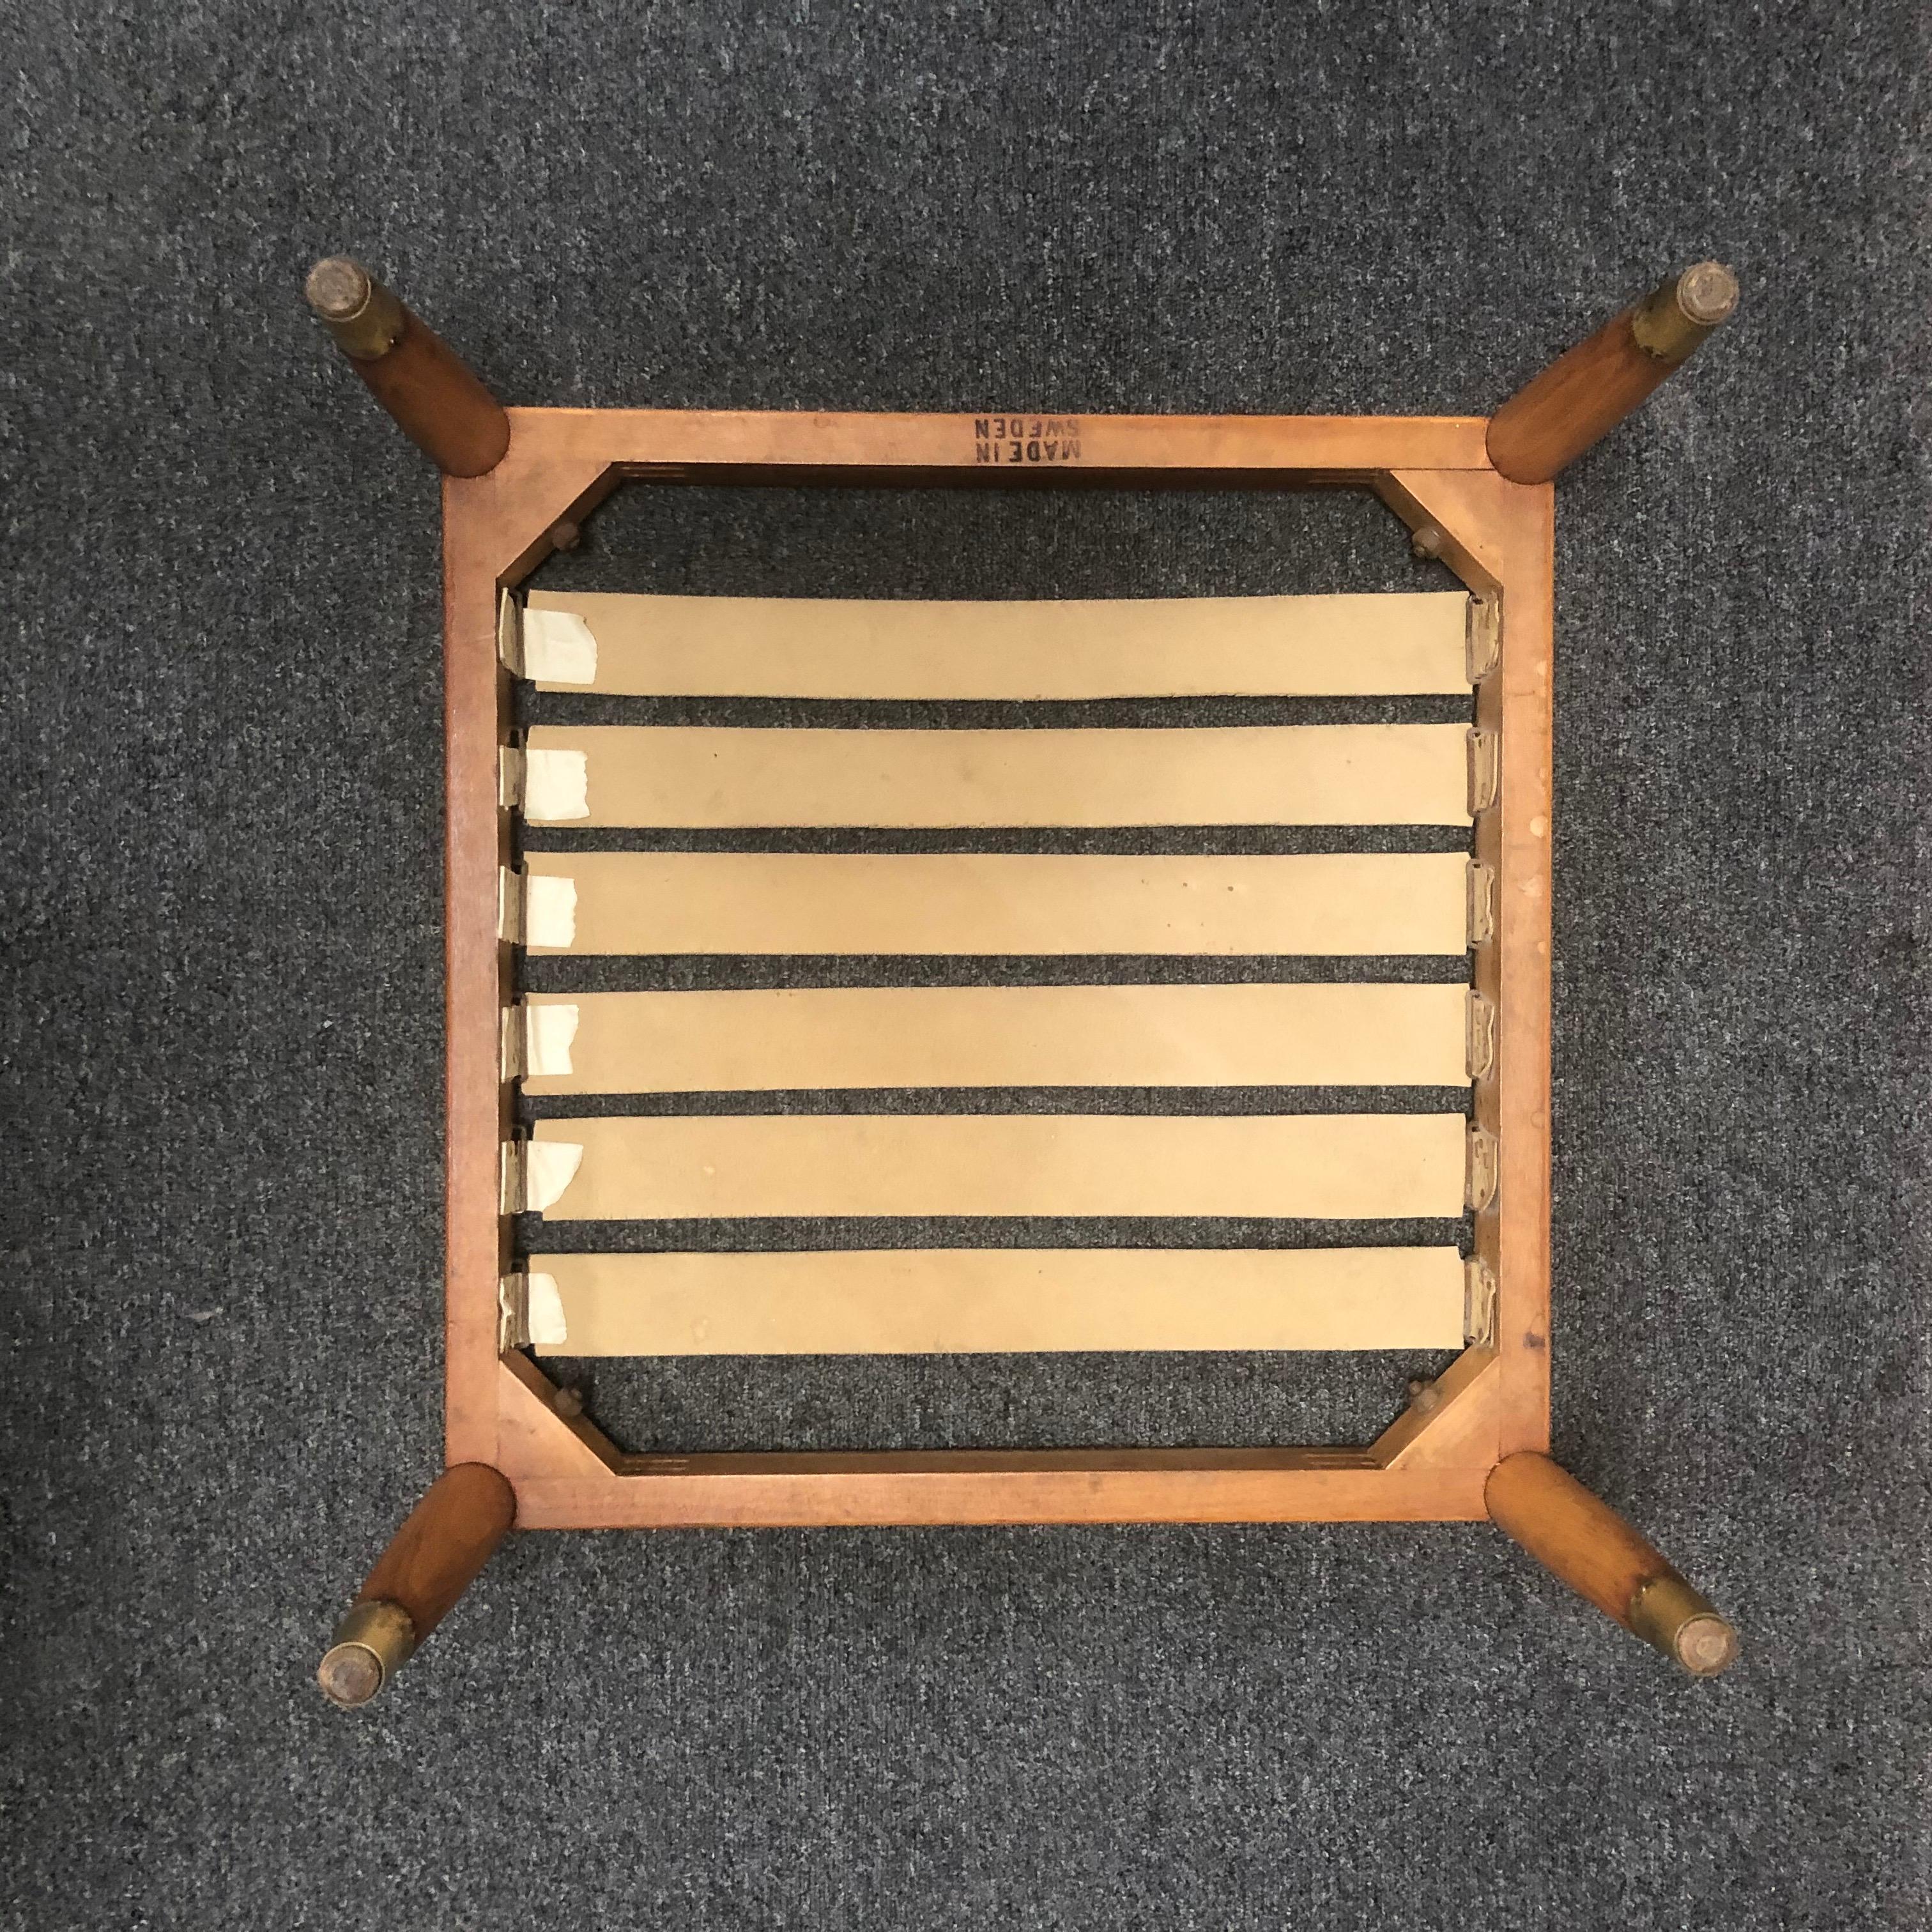 Scandinavian Modern Stool / Ottoman / Bench In Good Condition For Sale In San Diego, CA